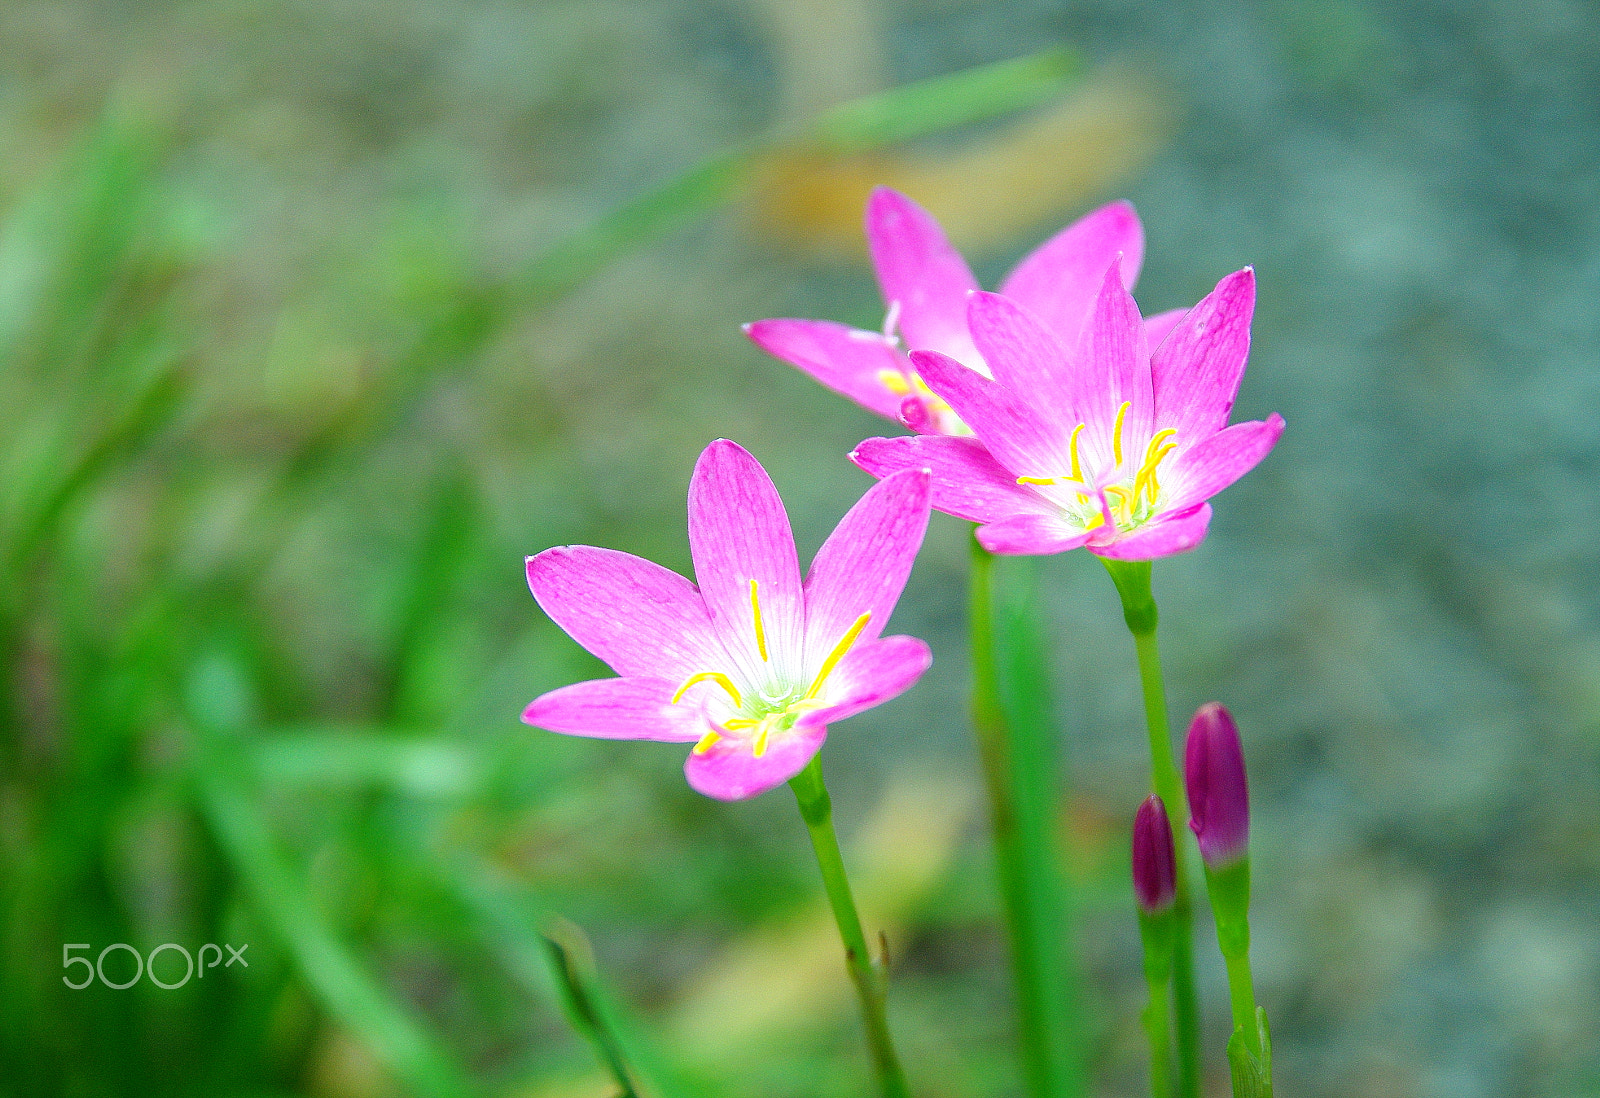 Pentax K-5 IIs sample photo. Flowers of new day photography